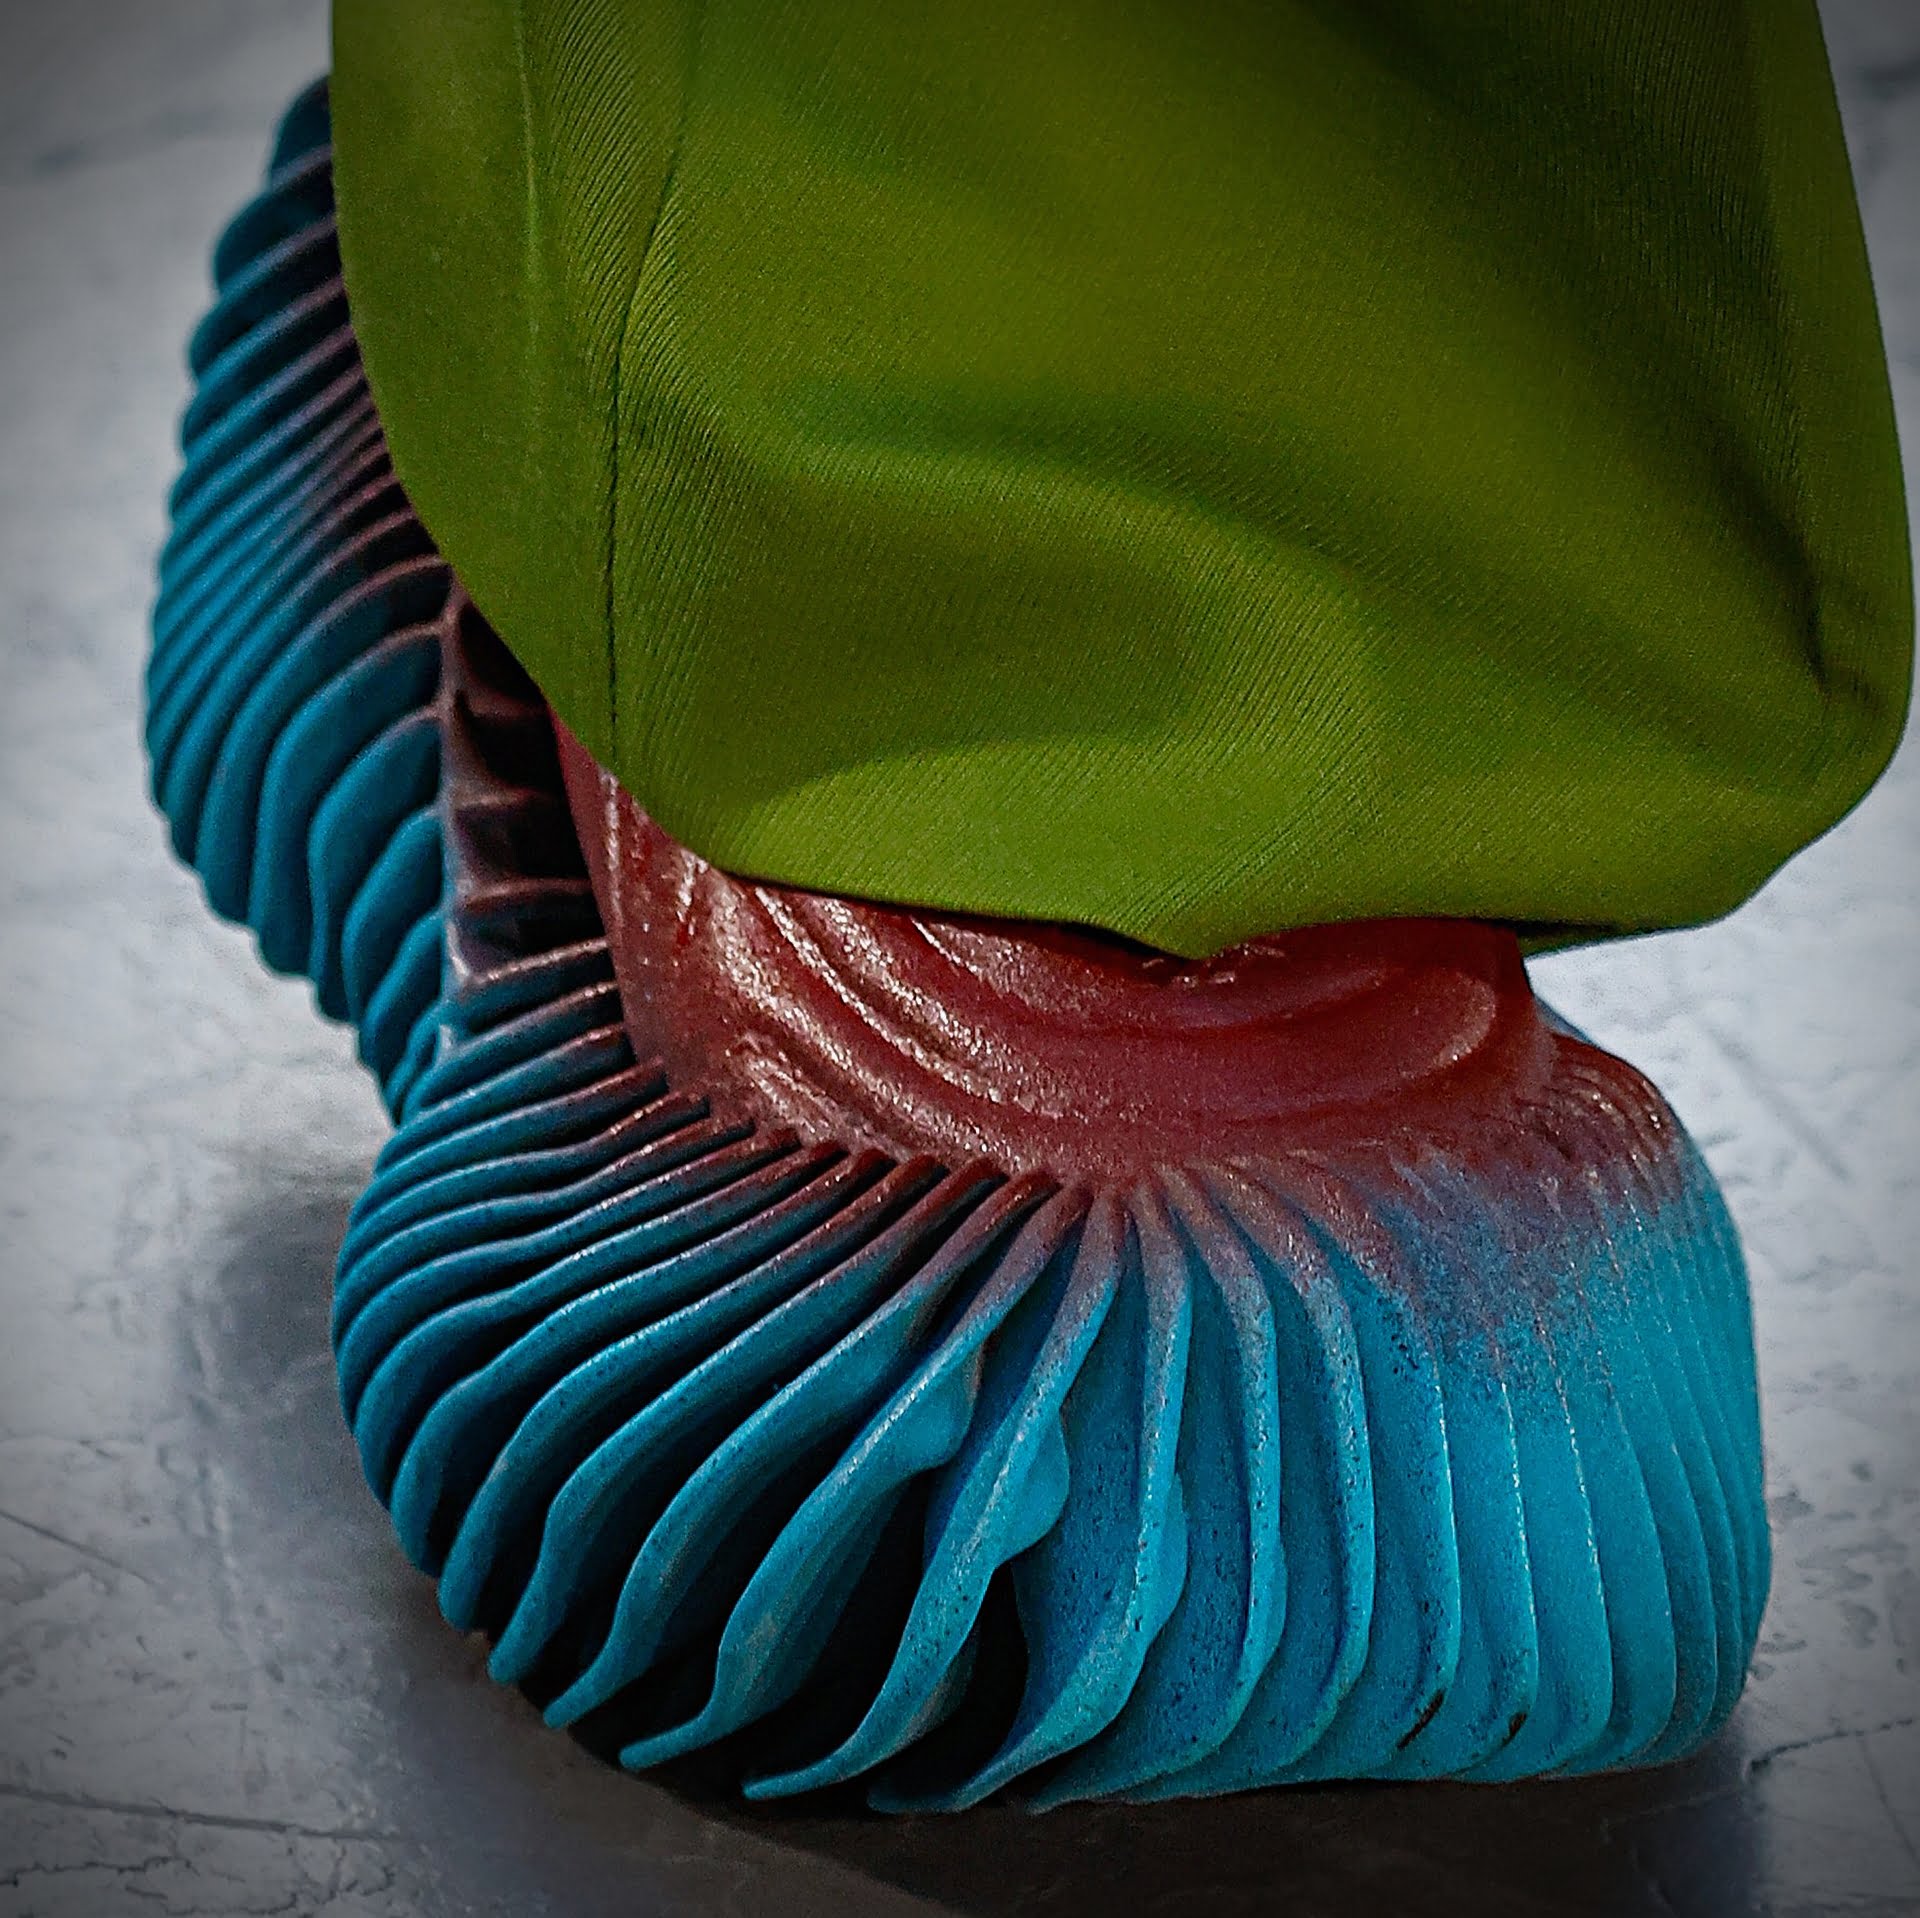 Reebok, HP, and and Botter 3d printed sneakers for PFW via 360 MAGAZINE.